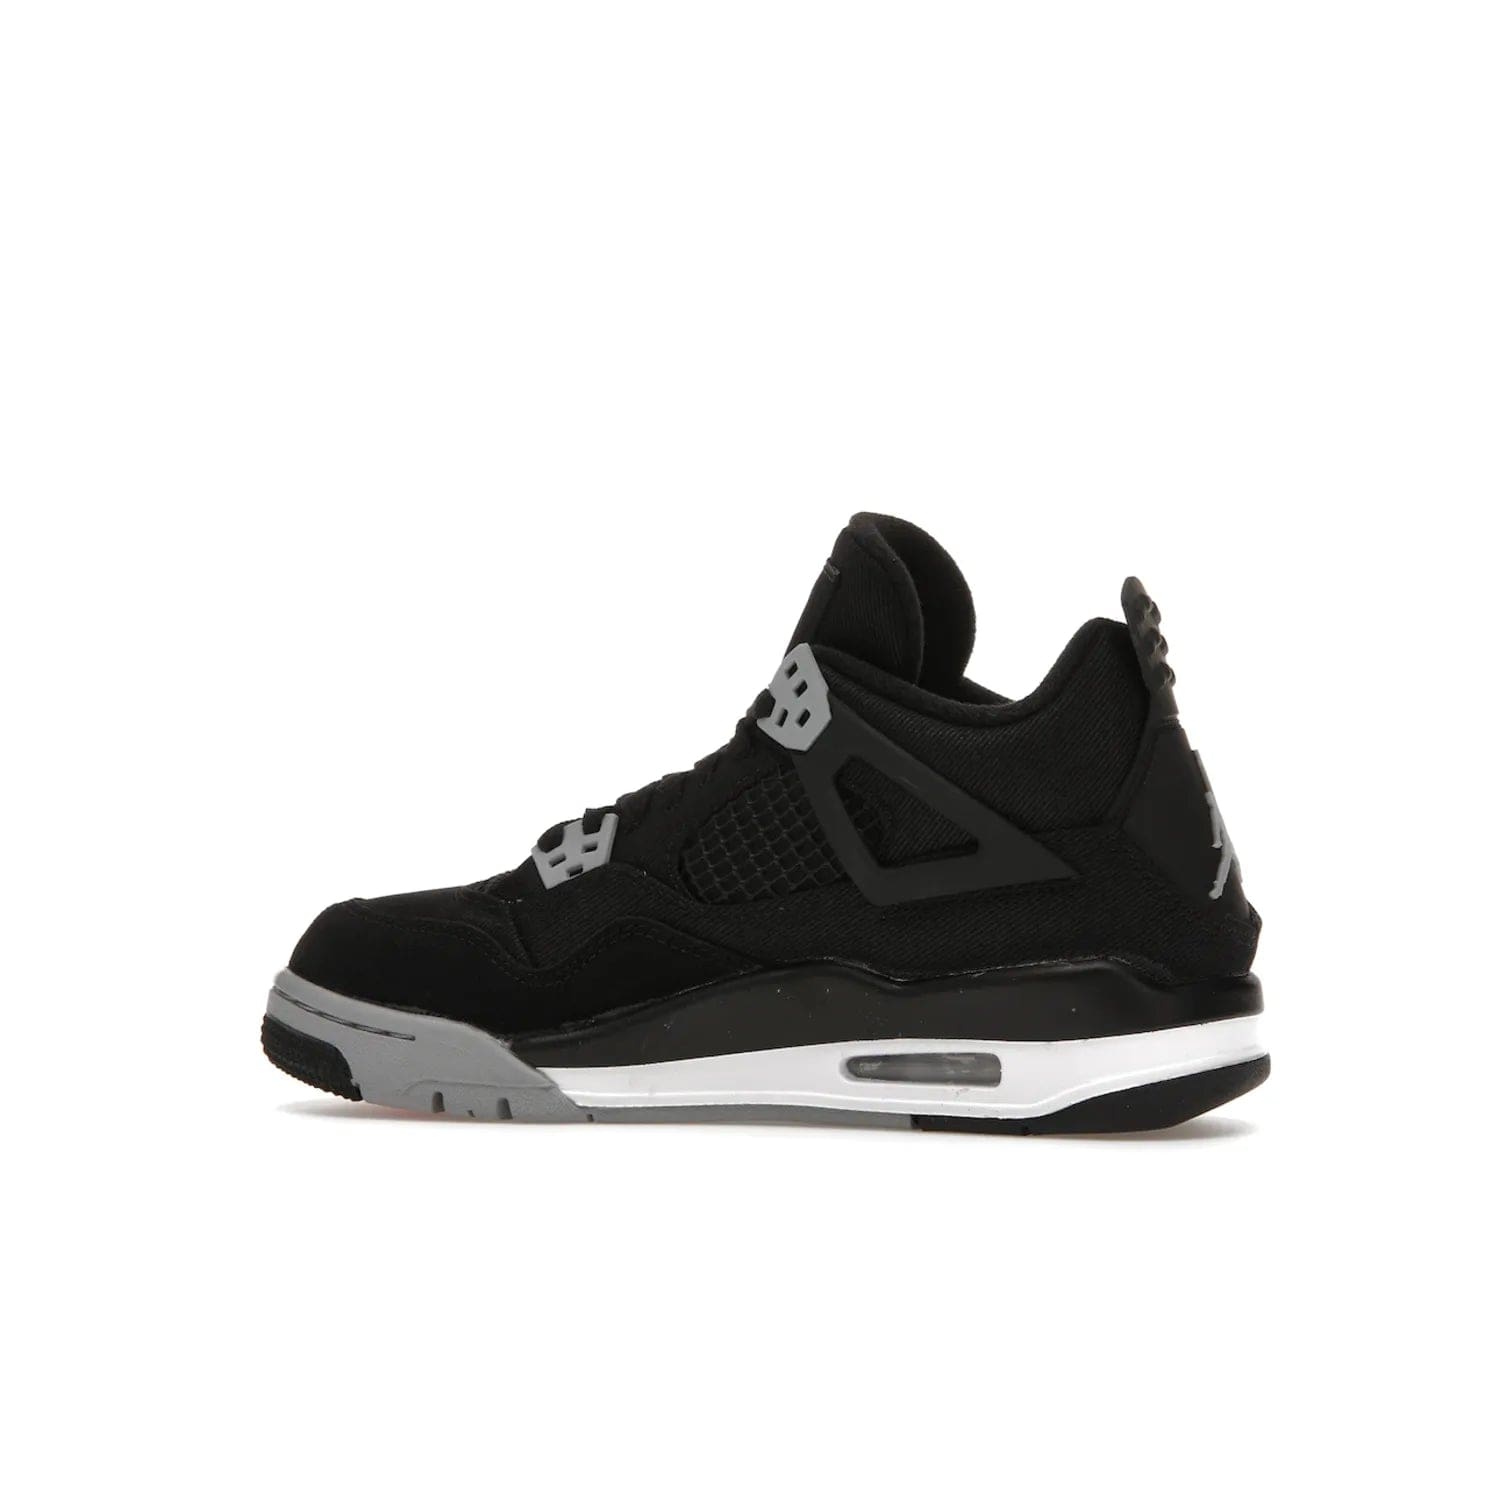 Jordan 4 Retro Black Canvas (GS) - Image 21 - Only at www.BallersClubKickz.com - Premium Air Jordan 4 Retro Black Canvas in grade-schooler's catalog. Featuring black suede canvas upper, grey molding, accents in red, white midsole, woven Jumpman tag, & visible AIR cushioning. Releasing Oct. 1, 2022.